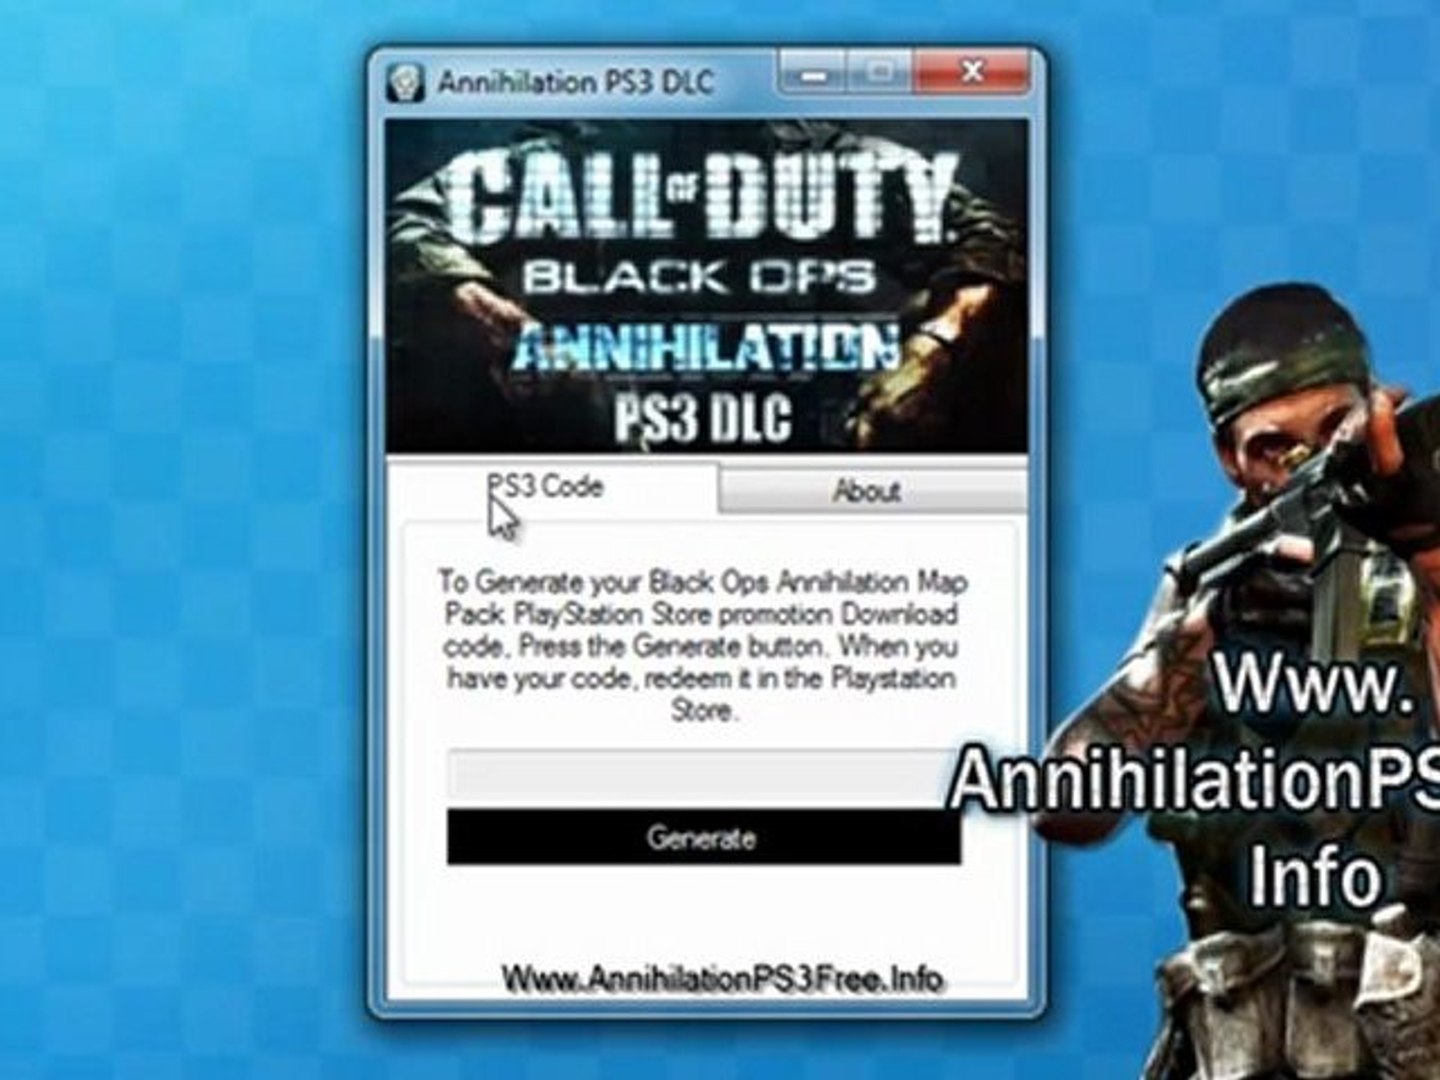 Get Free Black Ops Annihilation Map pack PS3 DLC Code - video Dailymotion